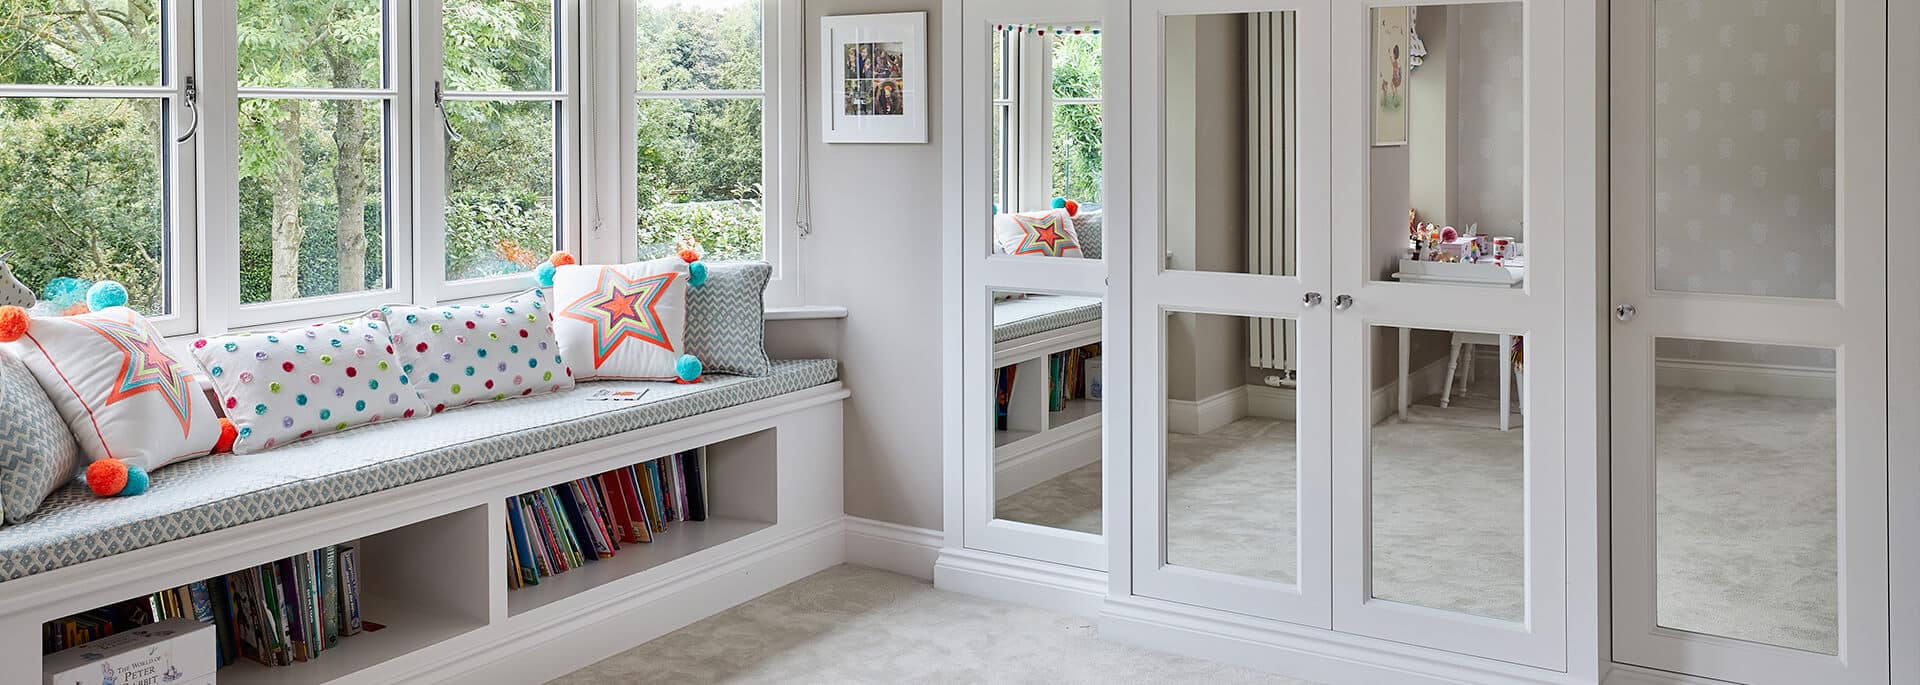 A luxurious fitted wardrobe complemented by a stylish window seat and shelves